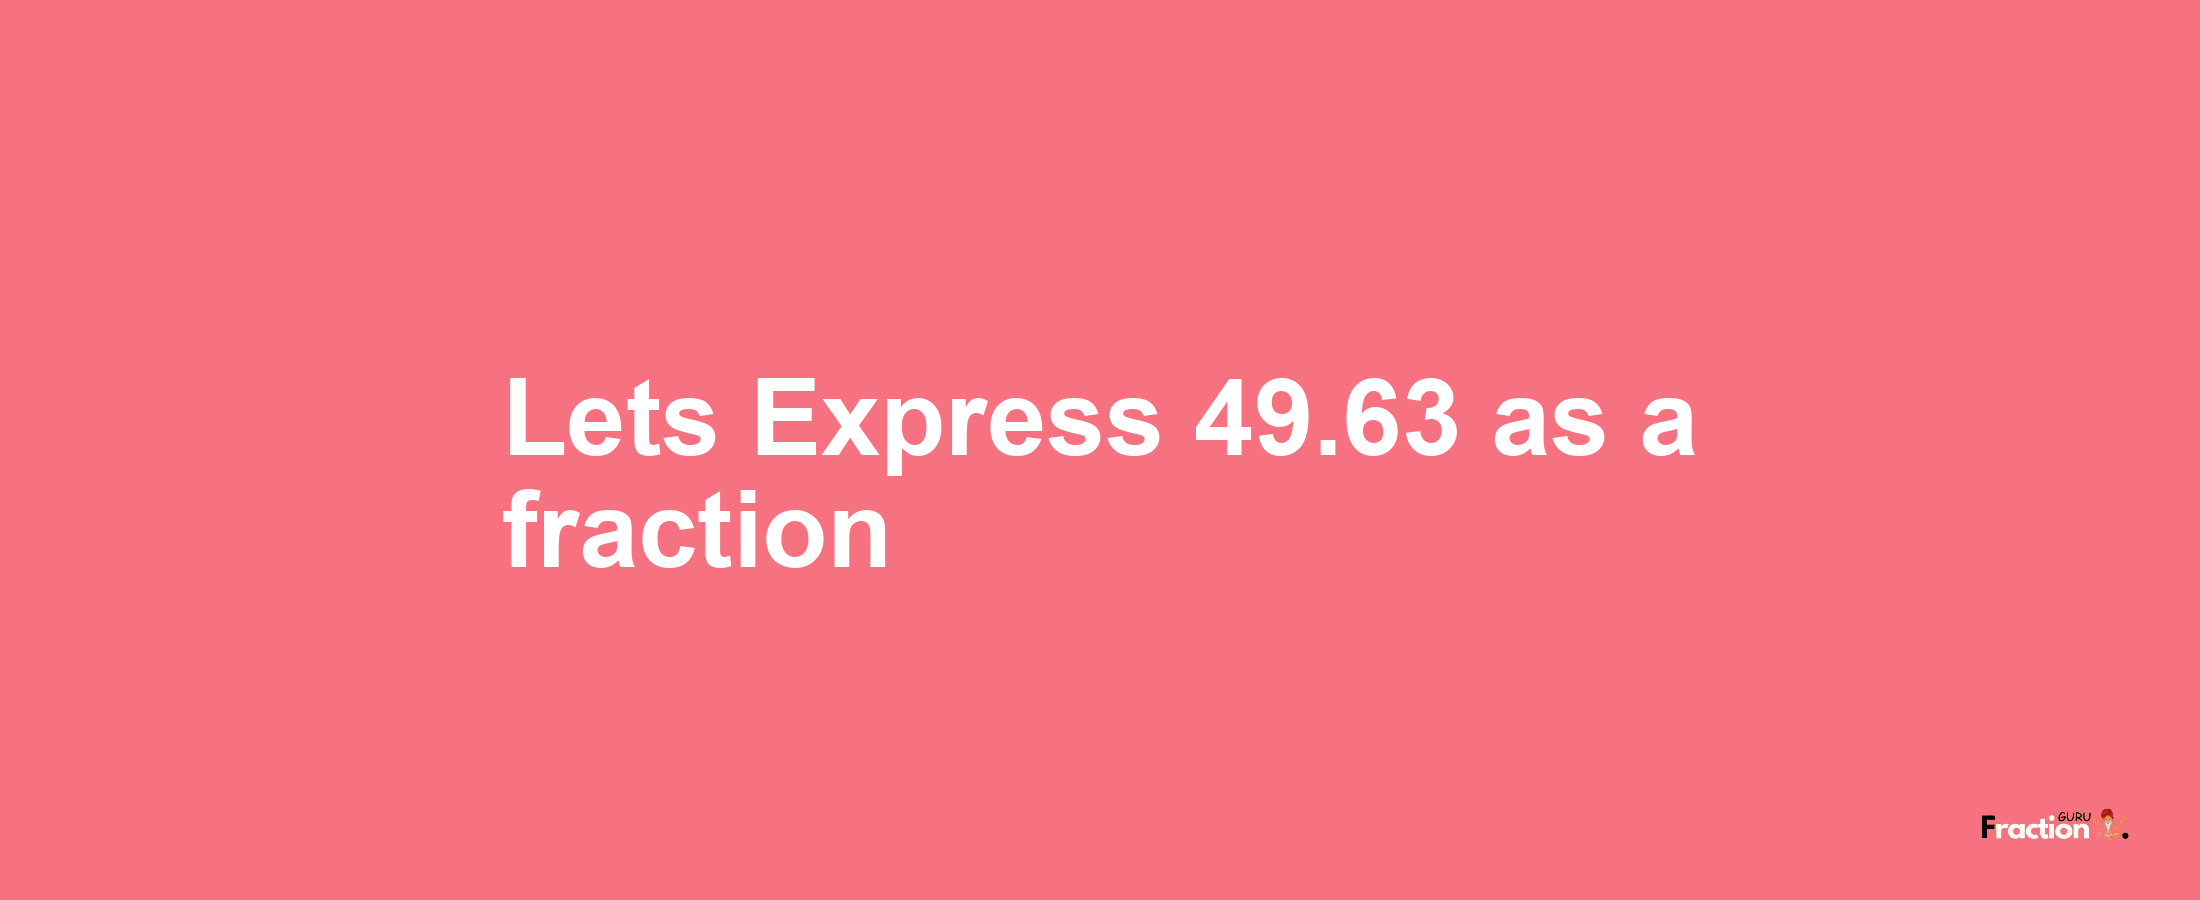 Lets Express 49.63 as afraction